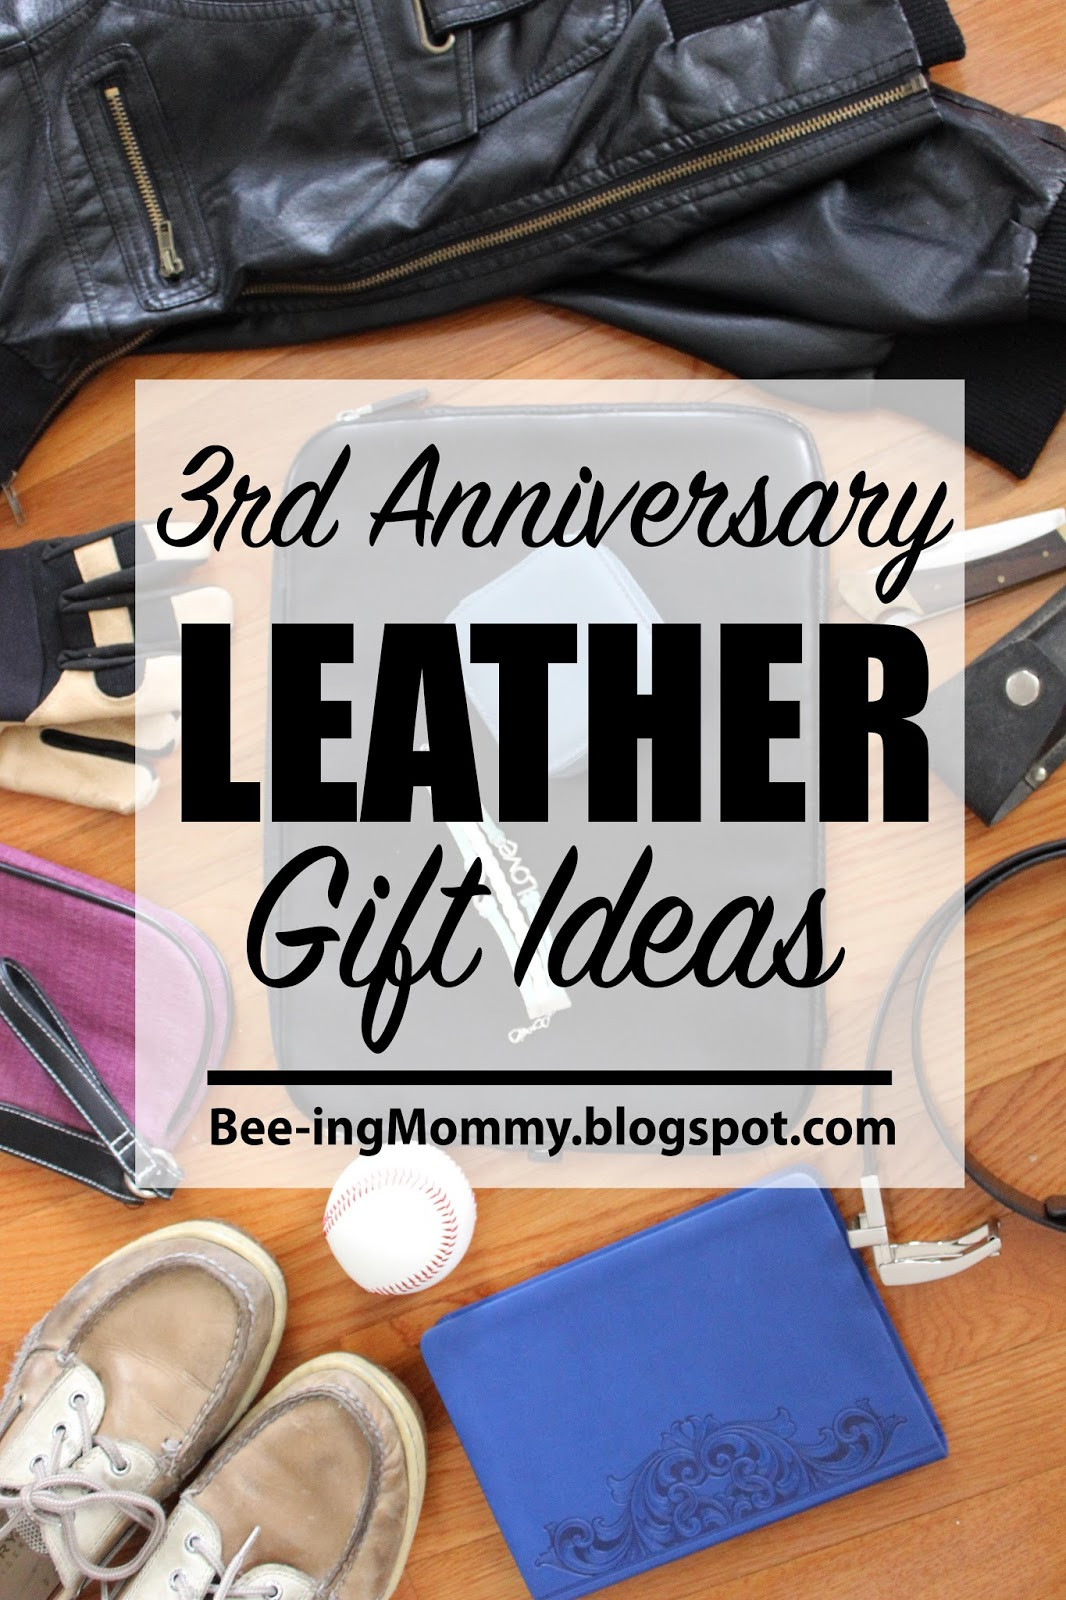 3 Year Anniversary Gift Ideas For Wife
 Bee ing Mommy Blog Third Wedding Anniversary Gift Ideas